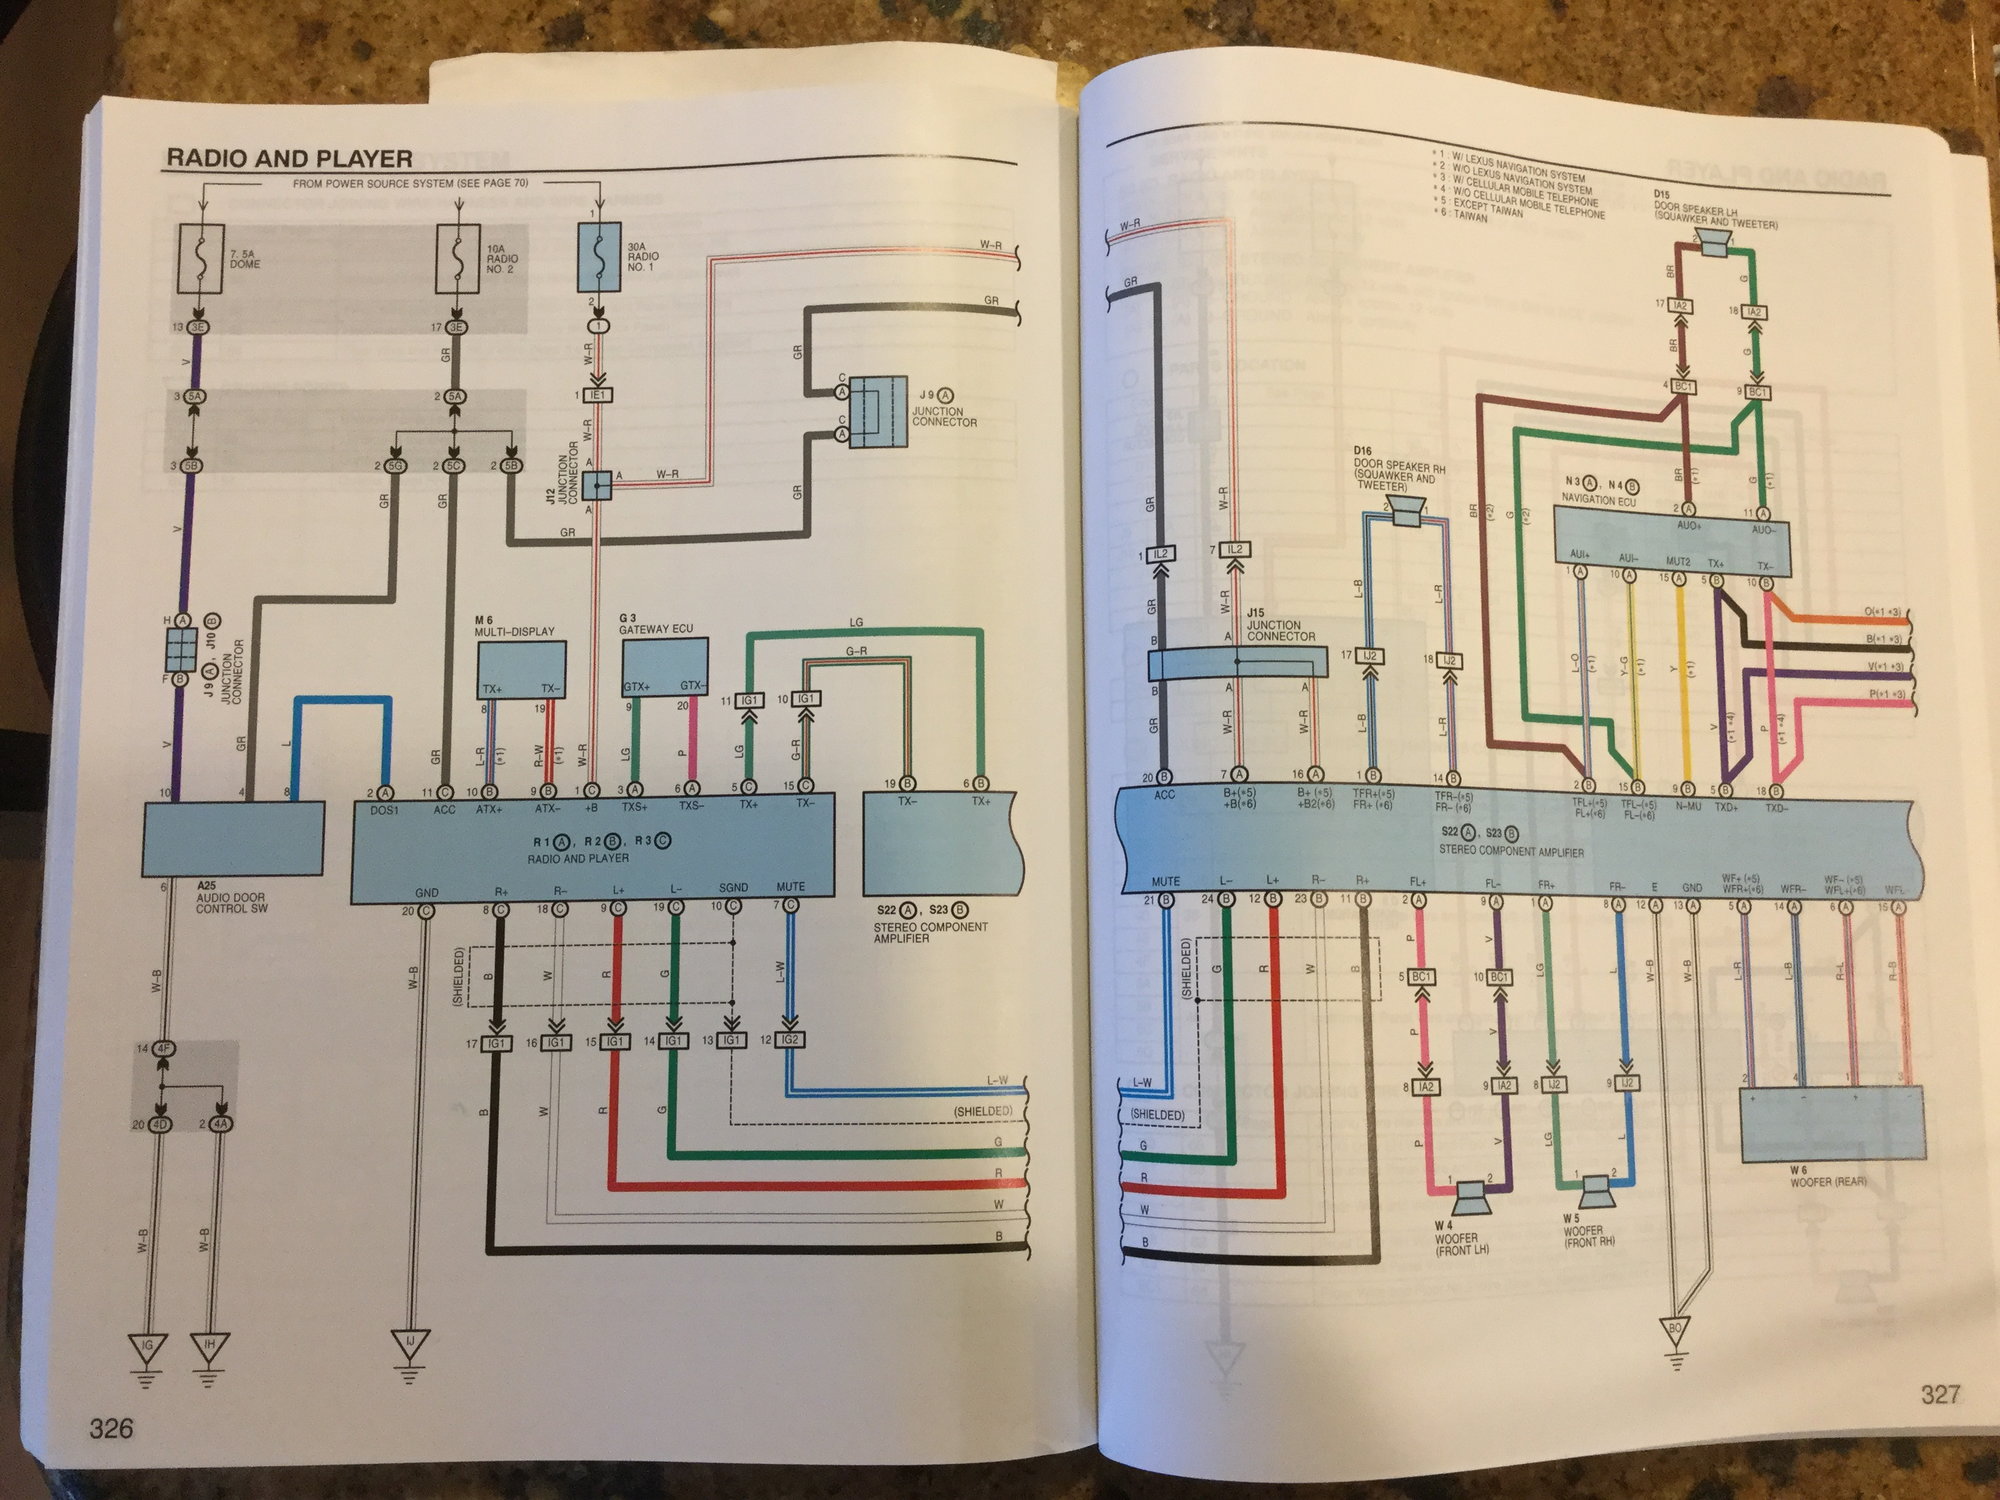 Wiring Diagram For Stereo Wires